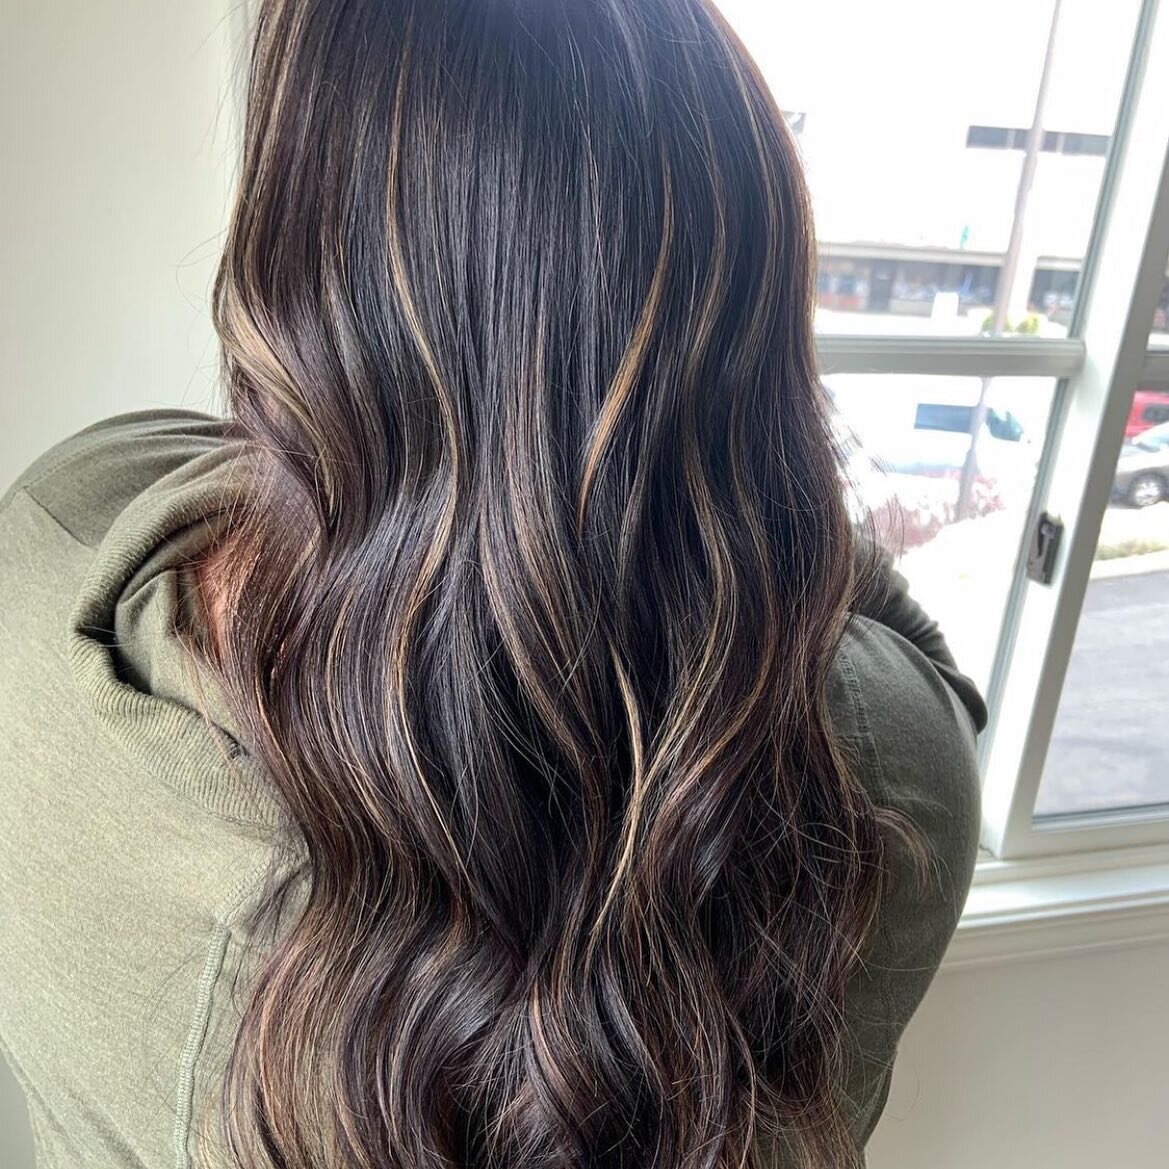 Subtle pops of lighter color in a brunette shade are just **chefs kiss** The internet is calling this look &lsquo;expensive brunette&rsquo; 🙈 we just call it gorgeous! Color and cut by our own Kim @babecutshair2 at #moorehairdesign